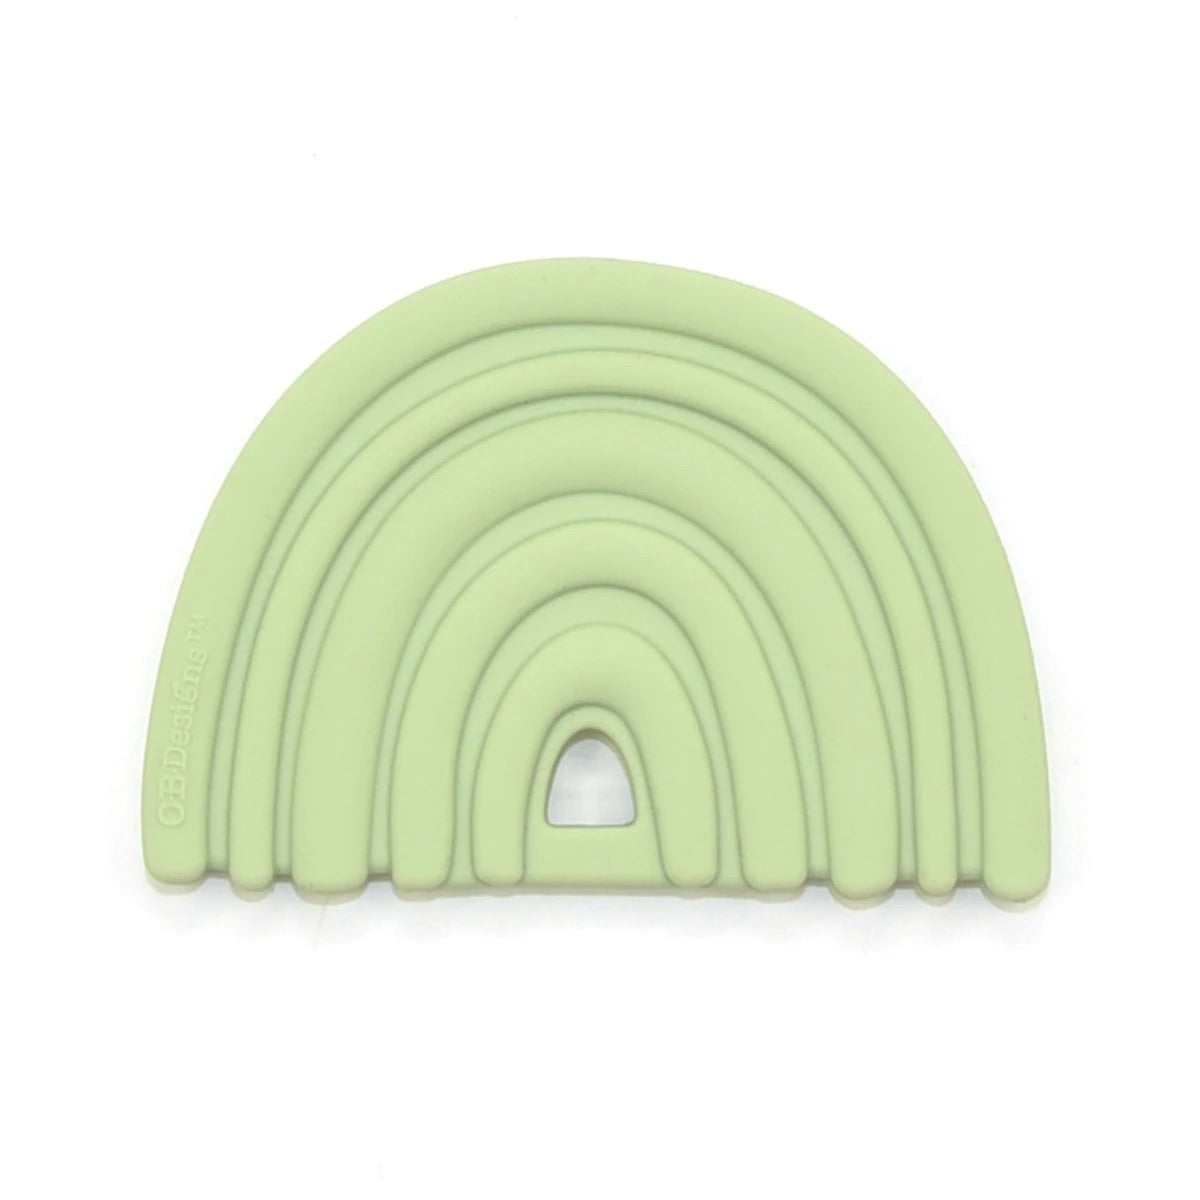 OB Designs Silicone Teether – Various Designs